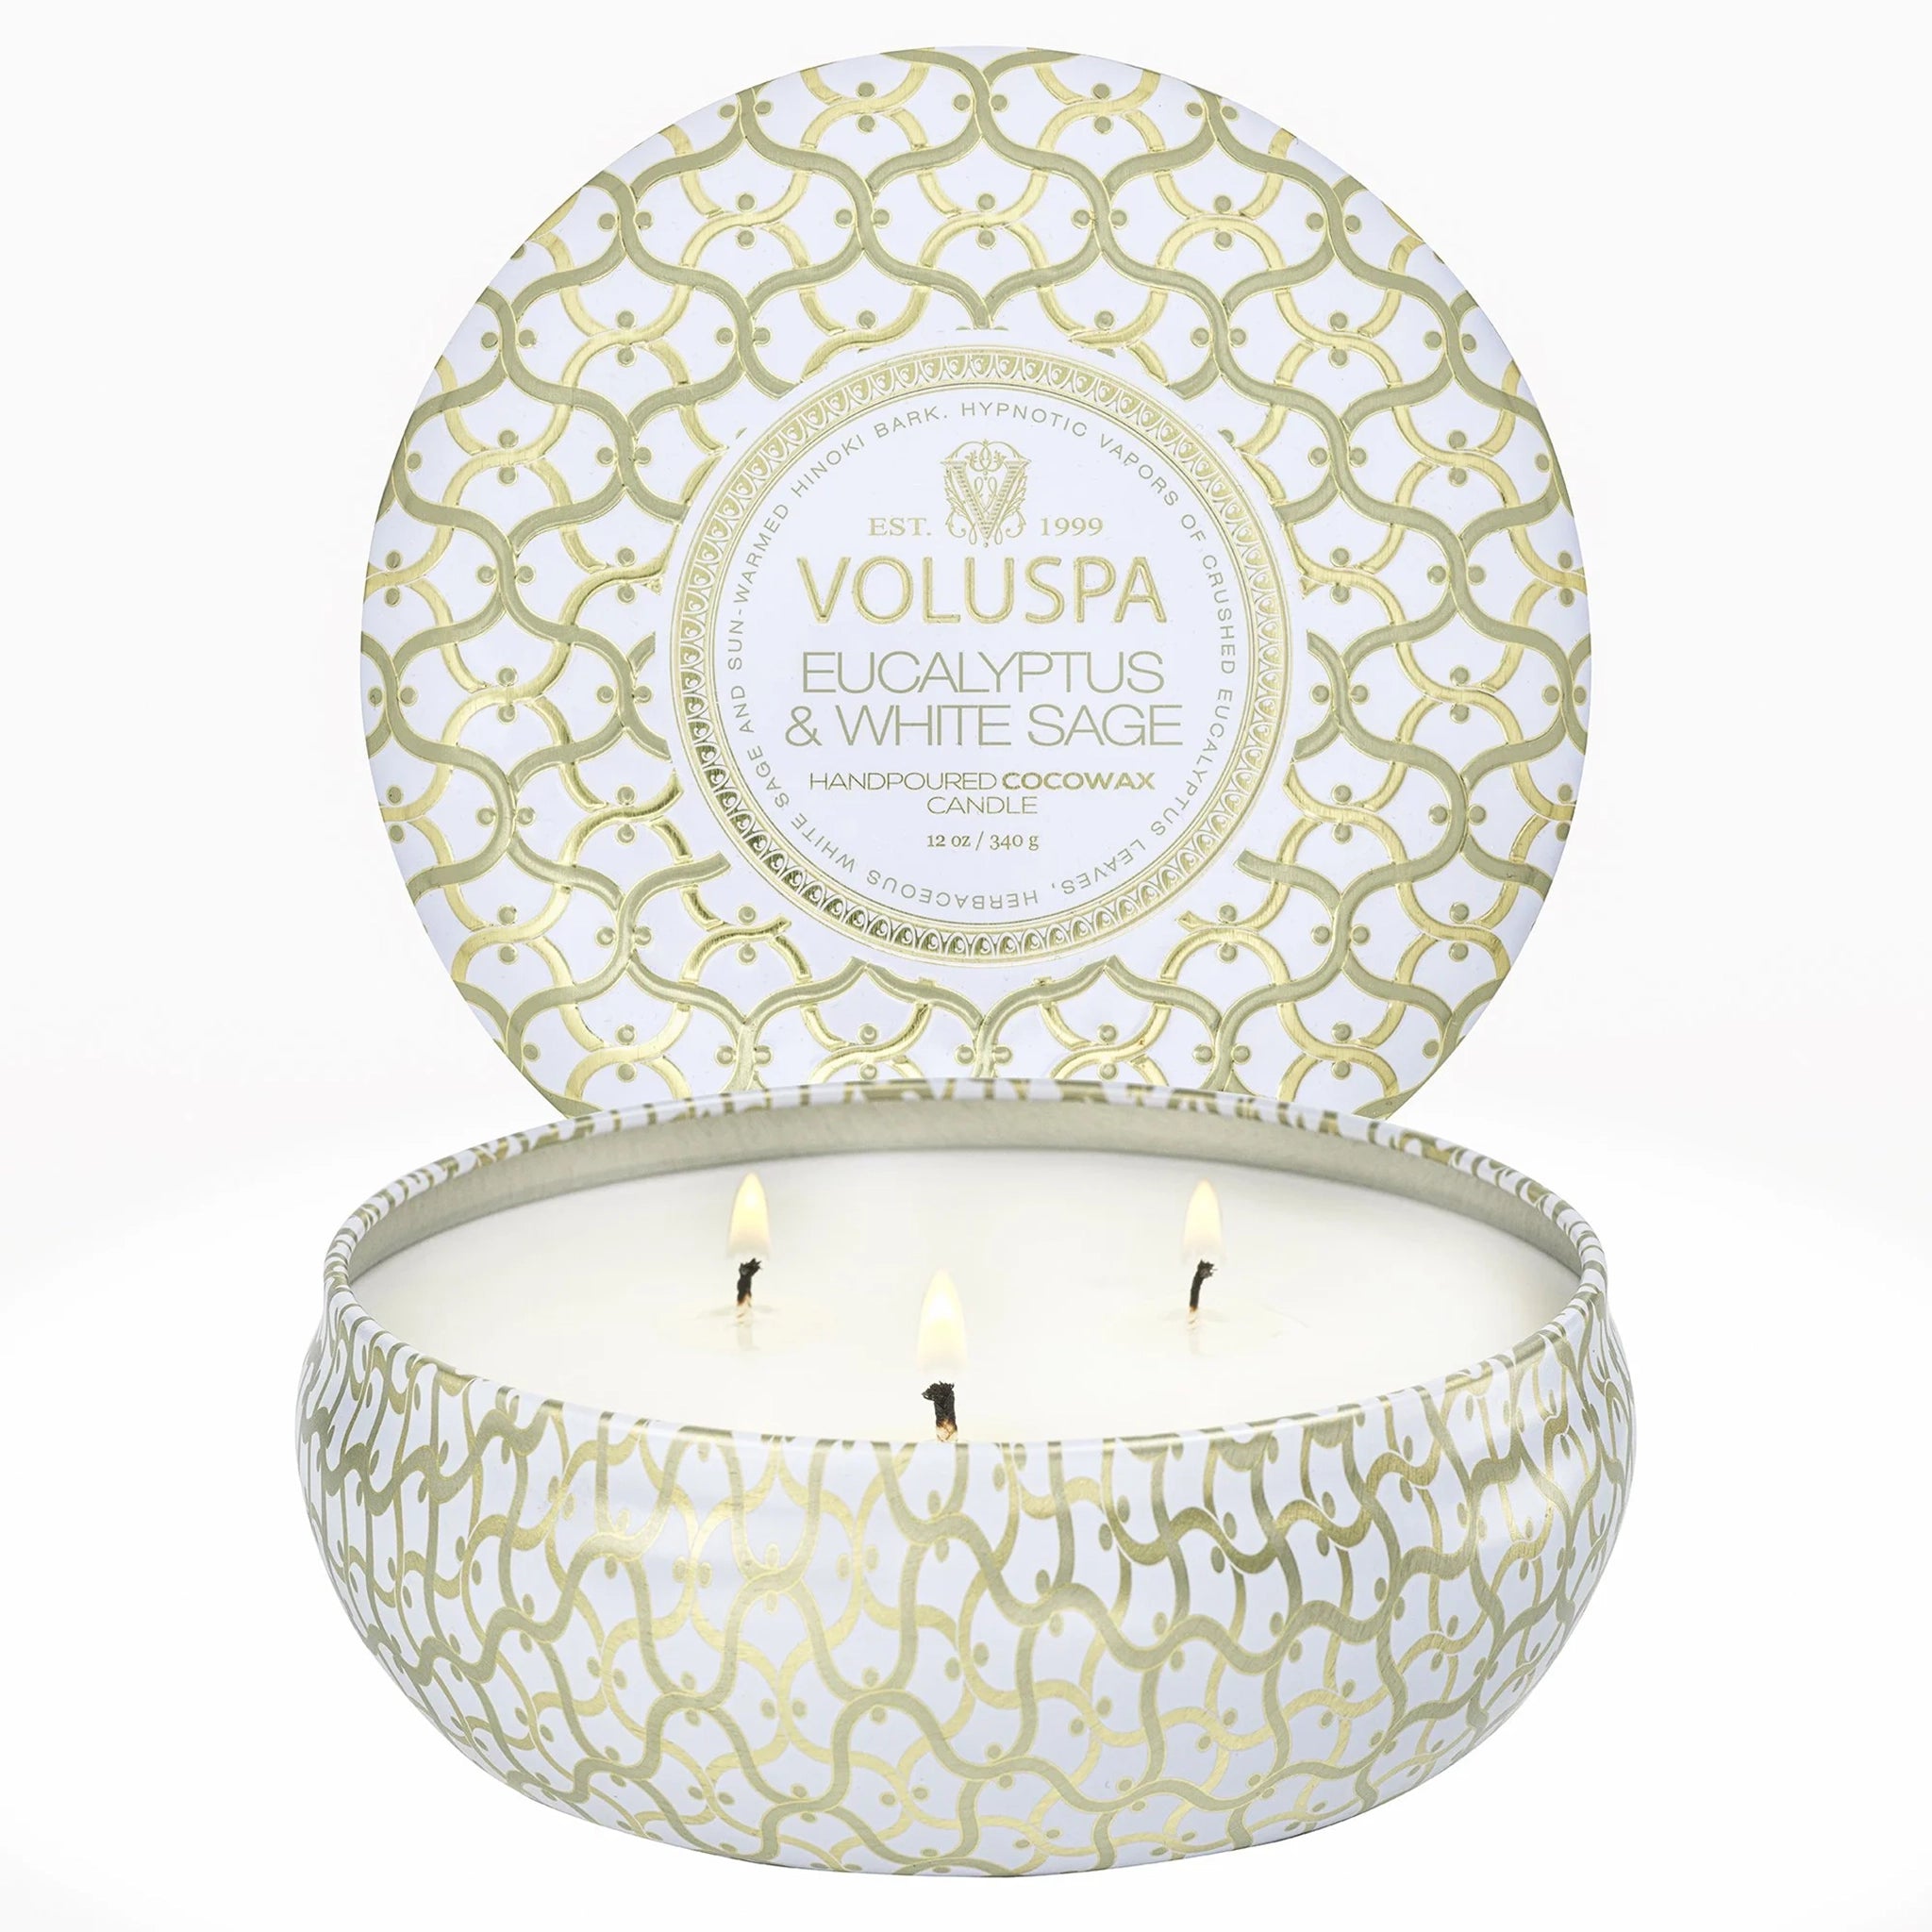 A round three wick candle in a white and gold cross design tin.